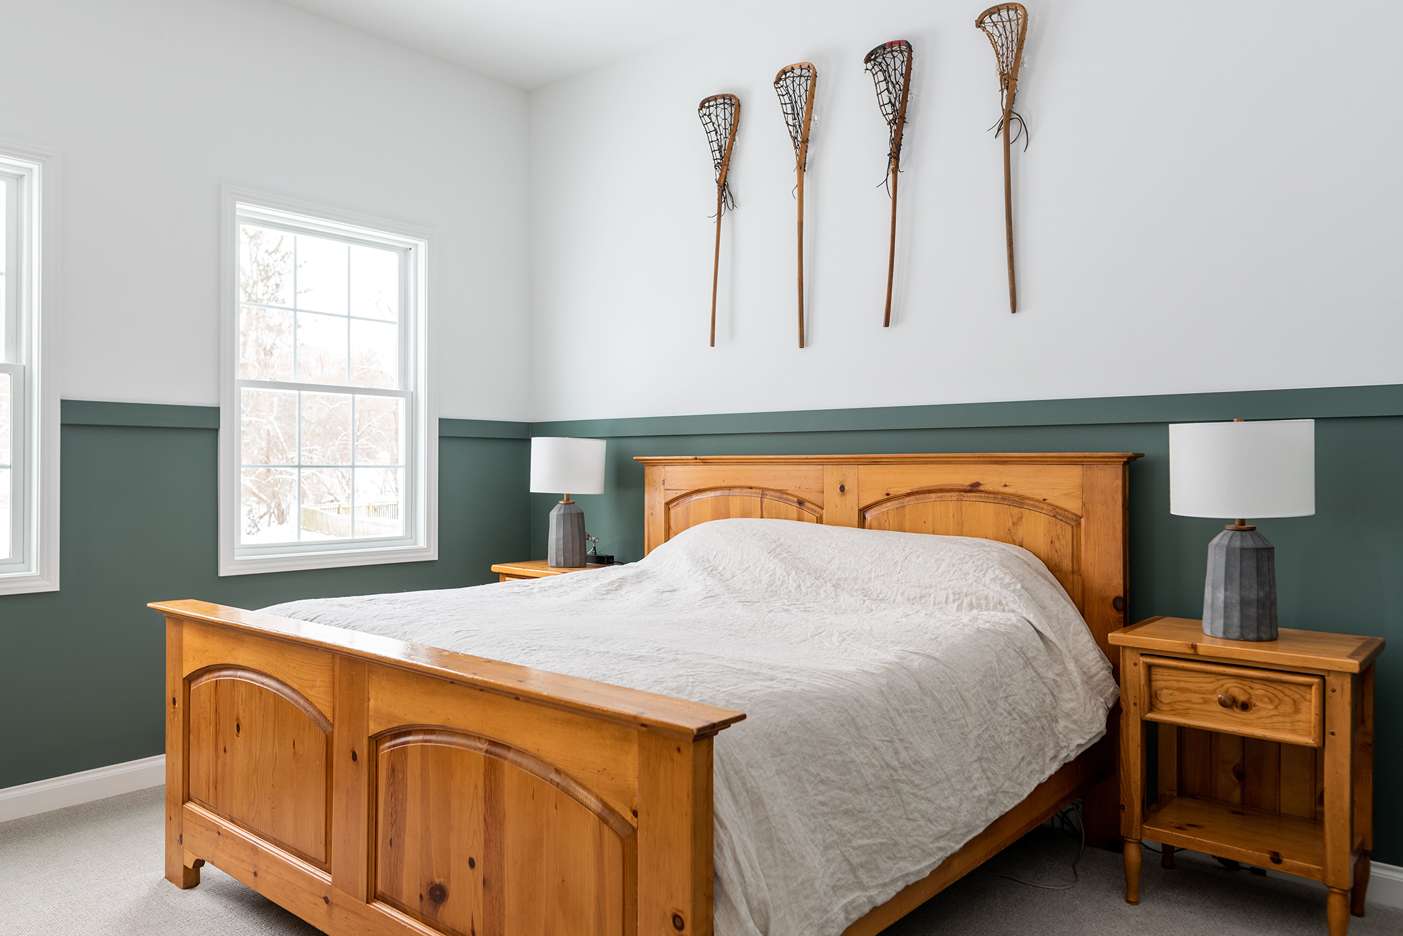 wooden bedframe and wainscotting in ohio remodel